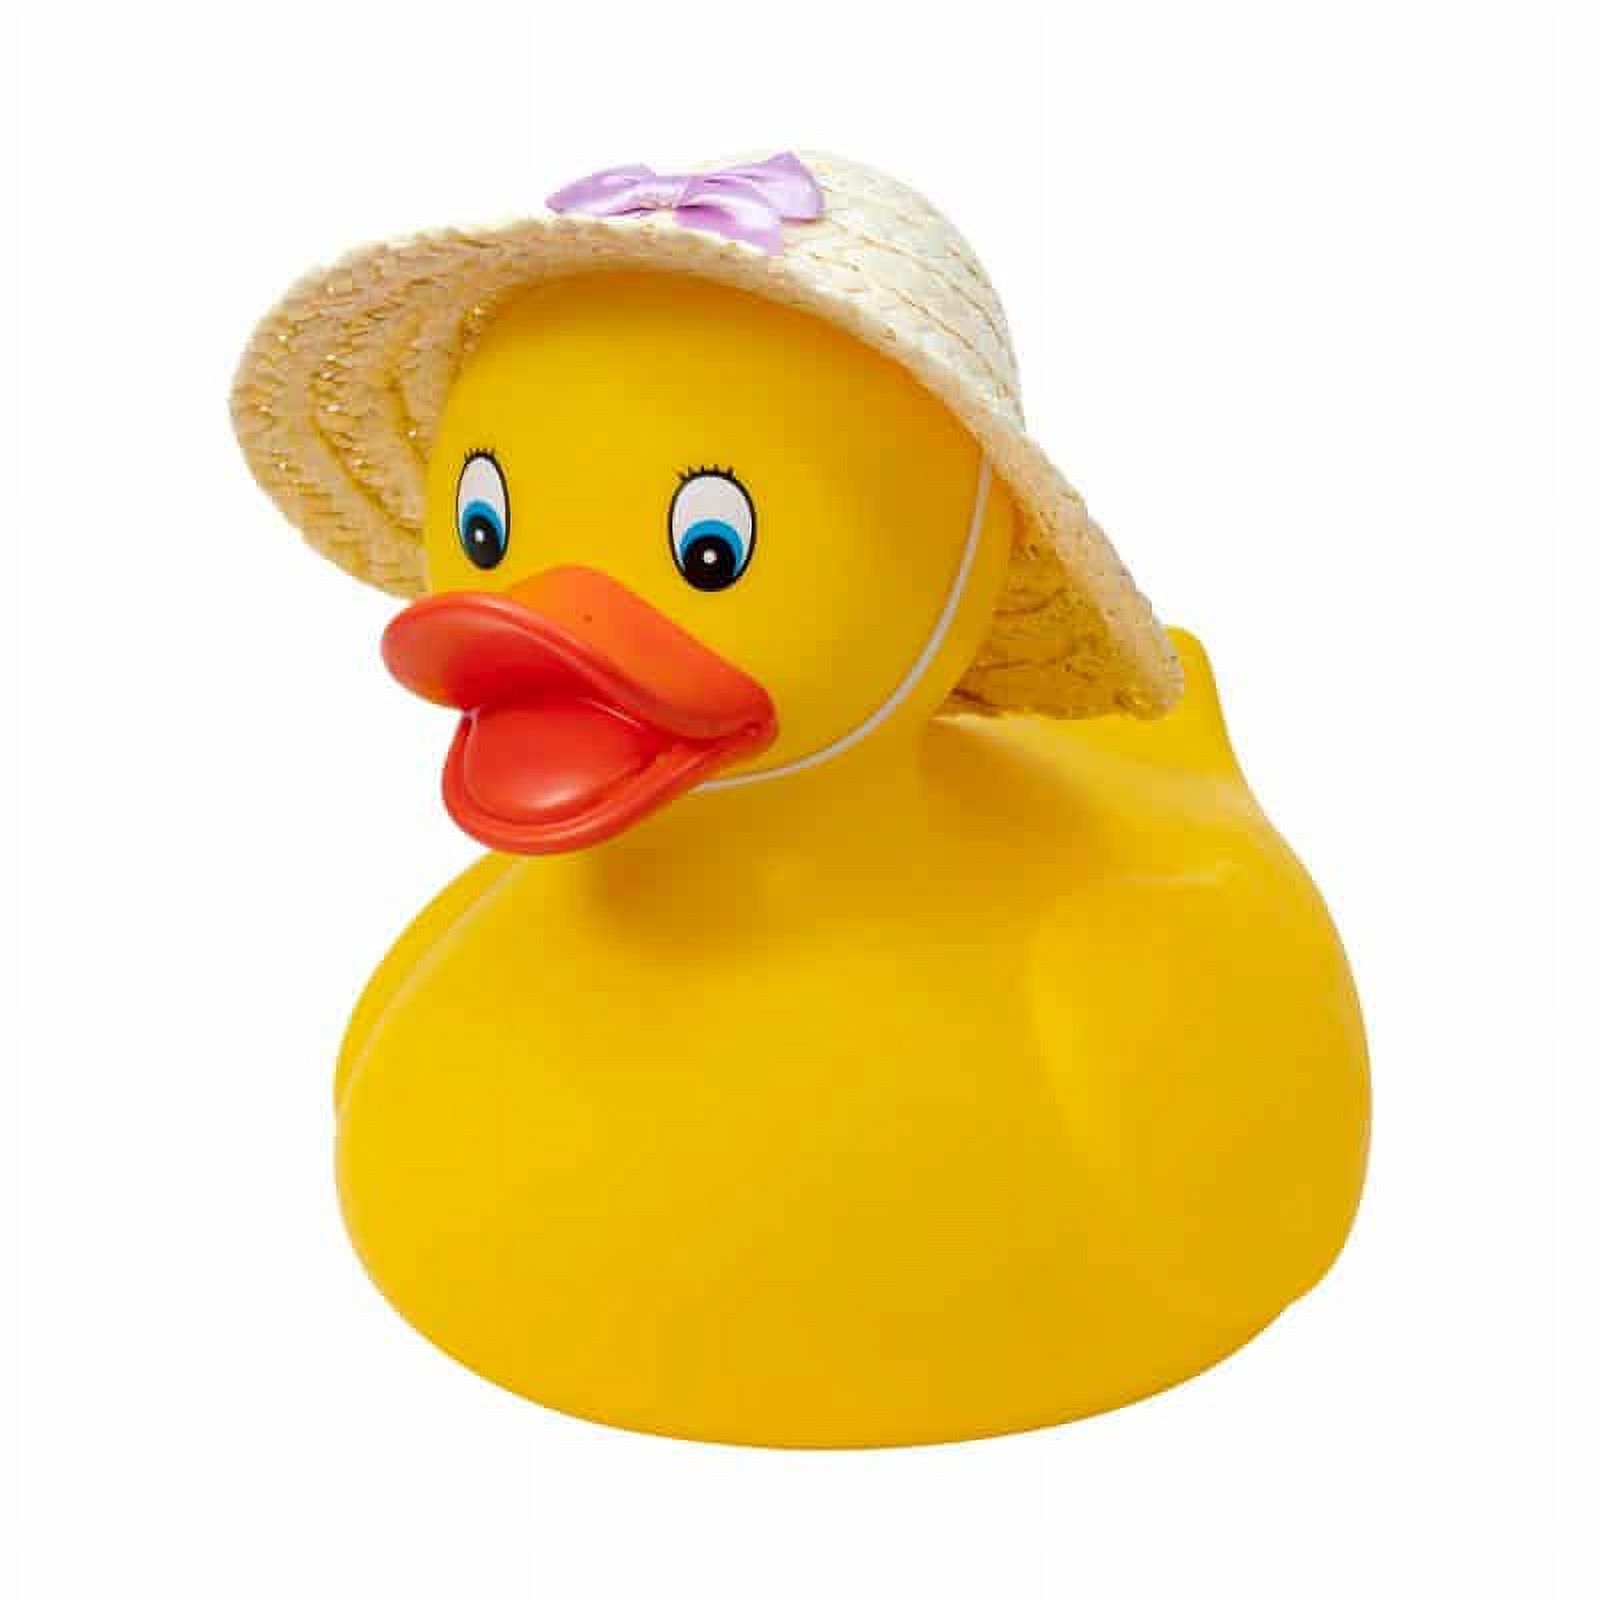 Schylling Large Classic Yellow Rubber Ducky (10in tall, styles vary) - image 3 of 7